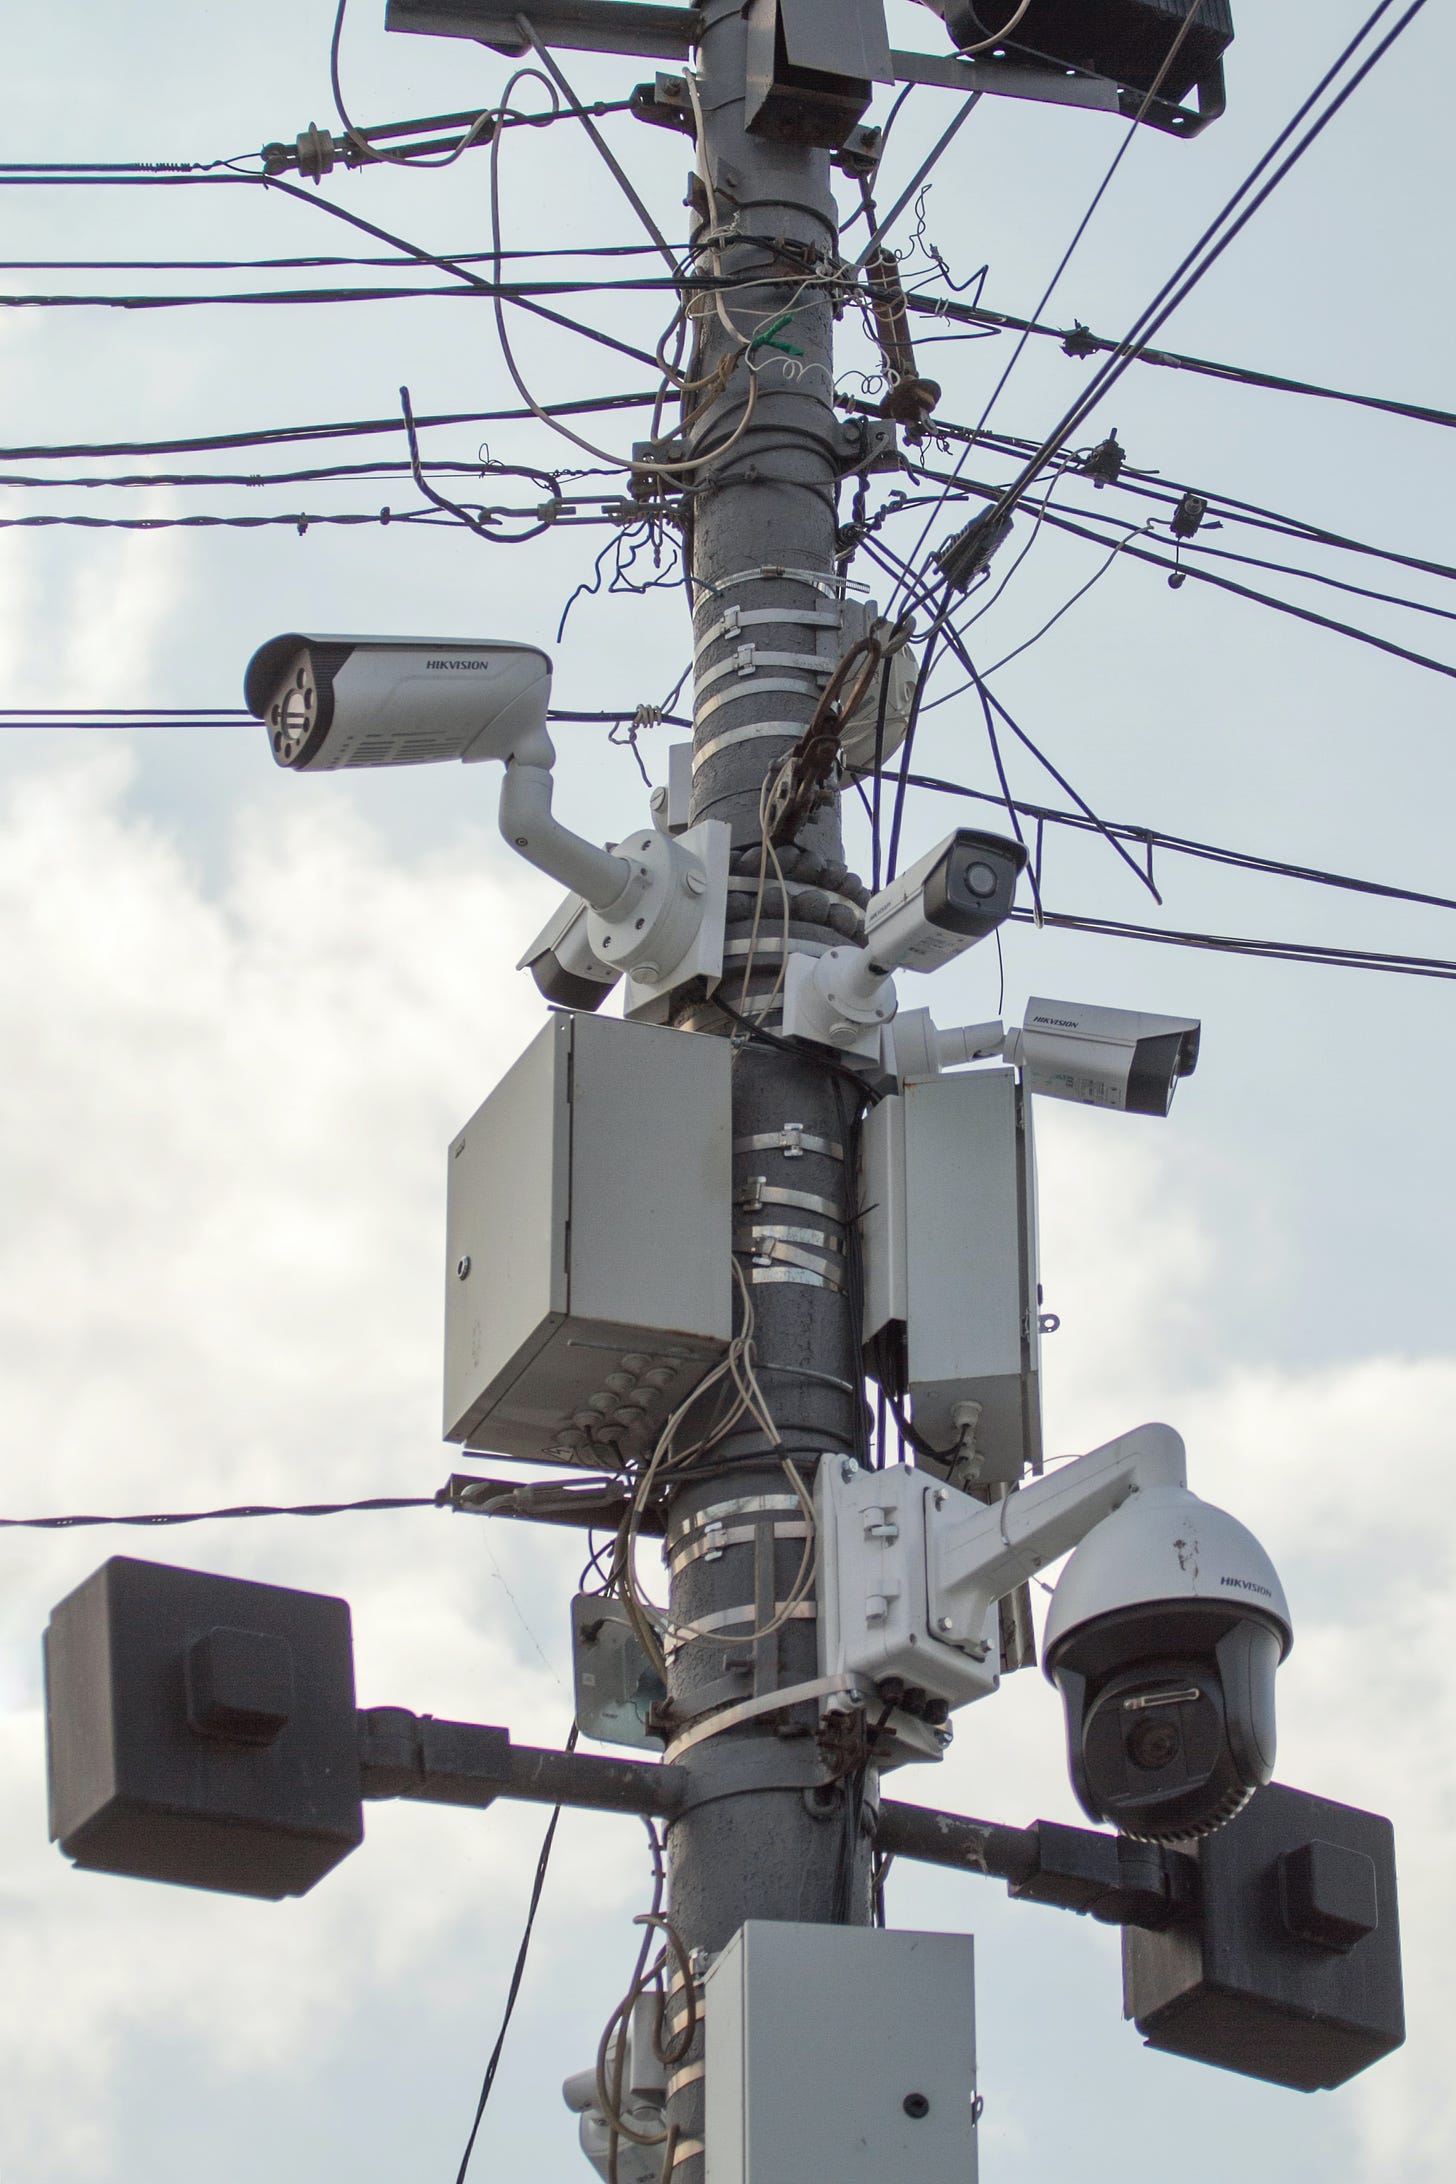 A photo of a utility pole with multiple surveillance cameras.